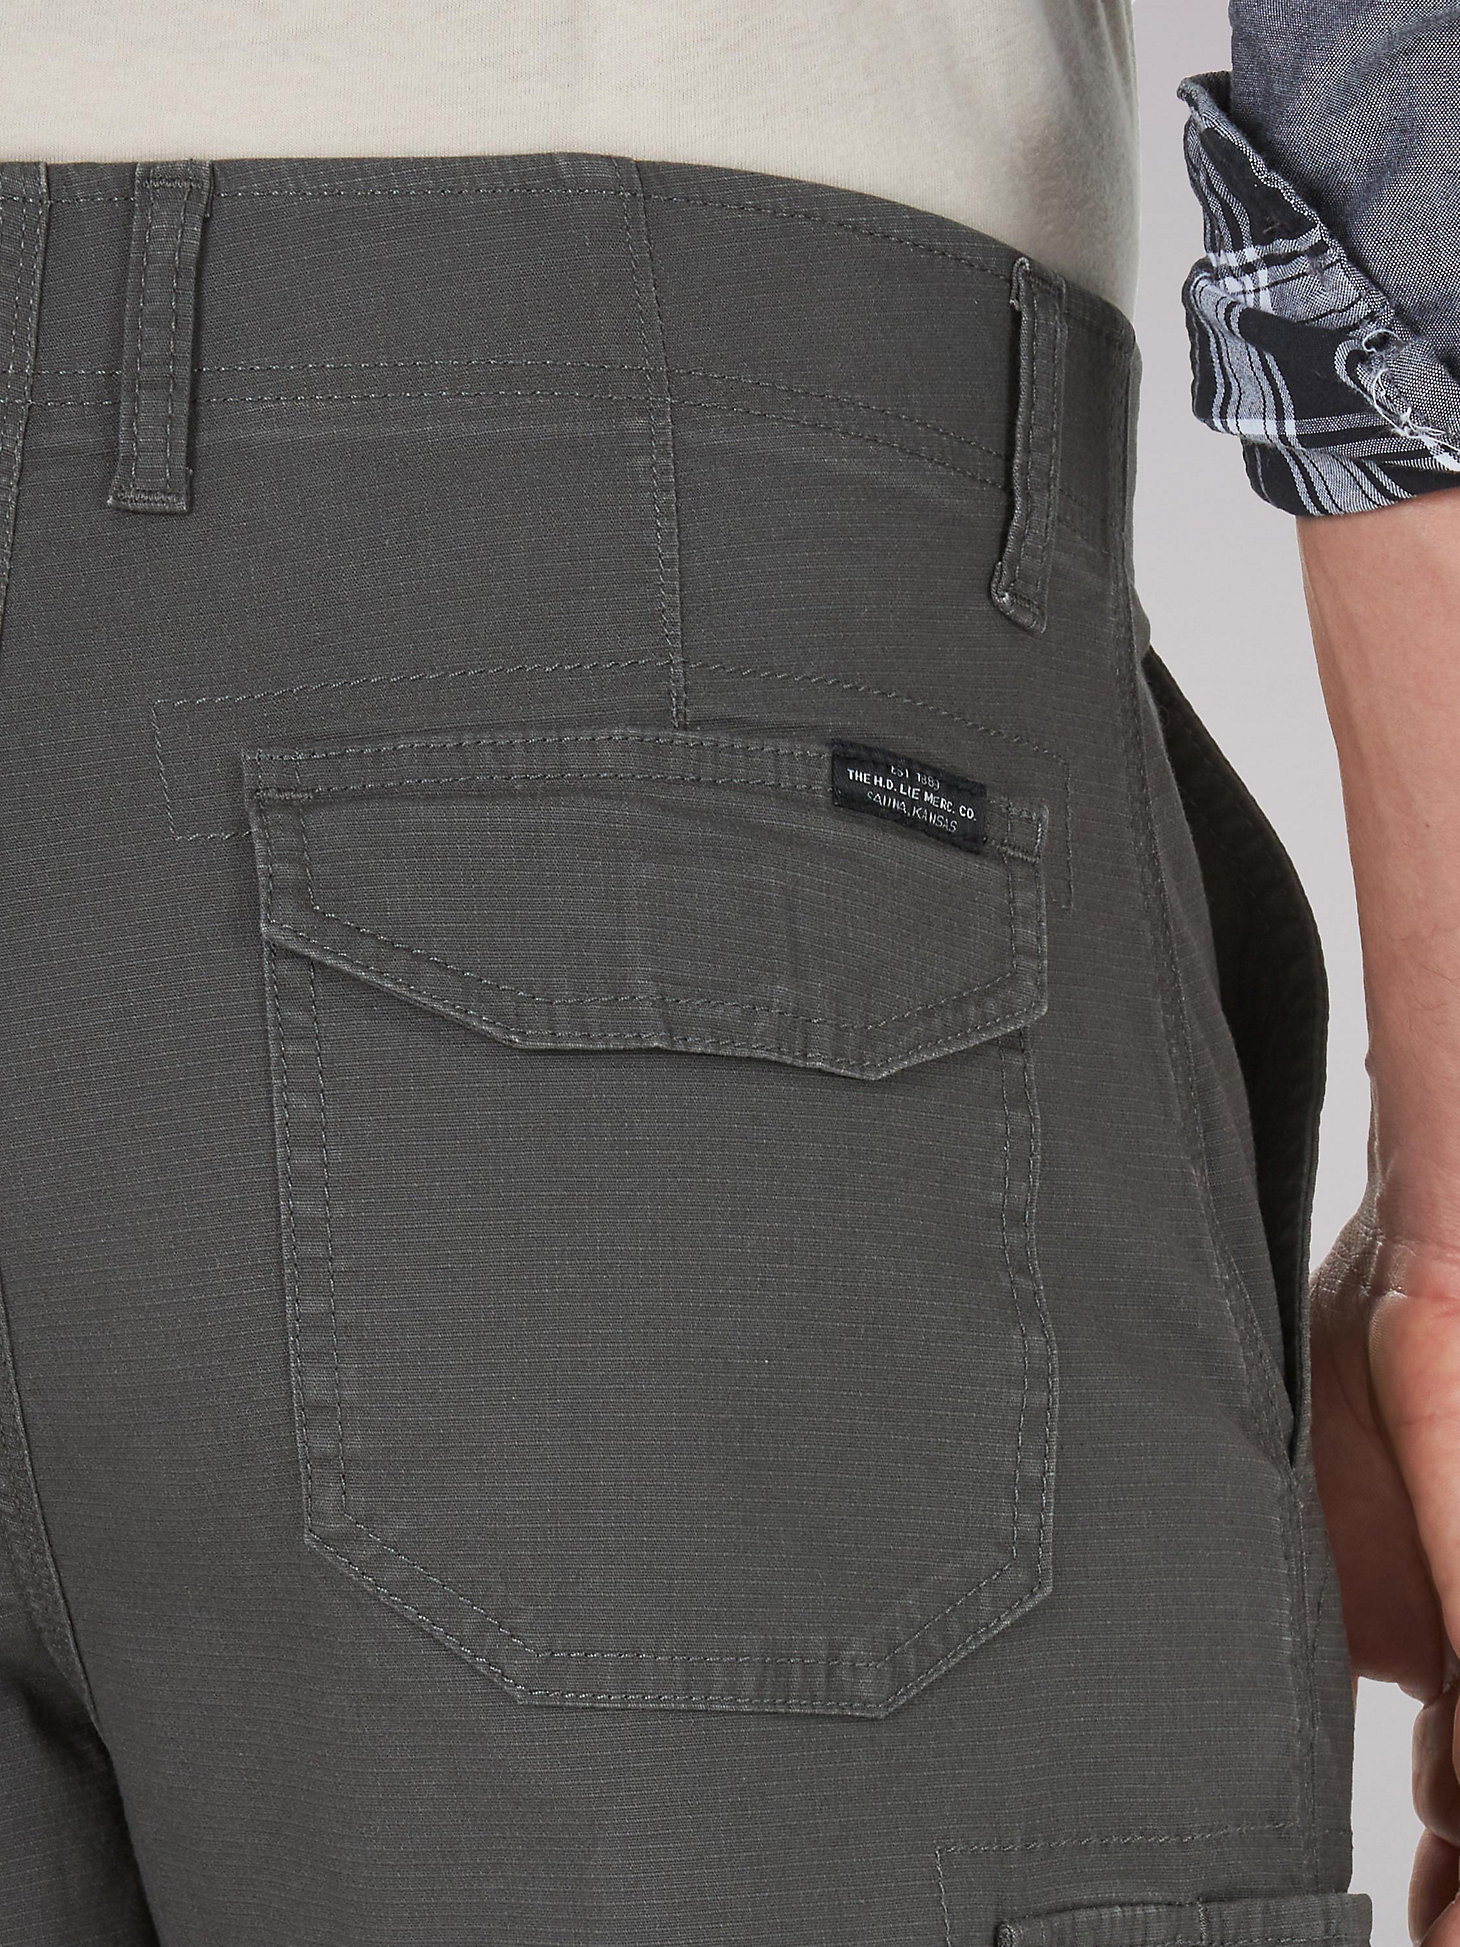 Men's Extreme Motion Swope Short in Engineer alternative view 3